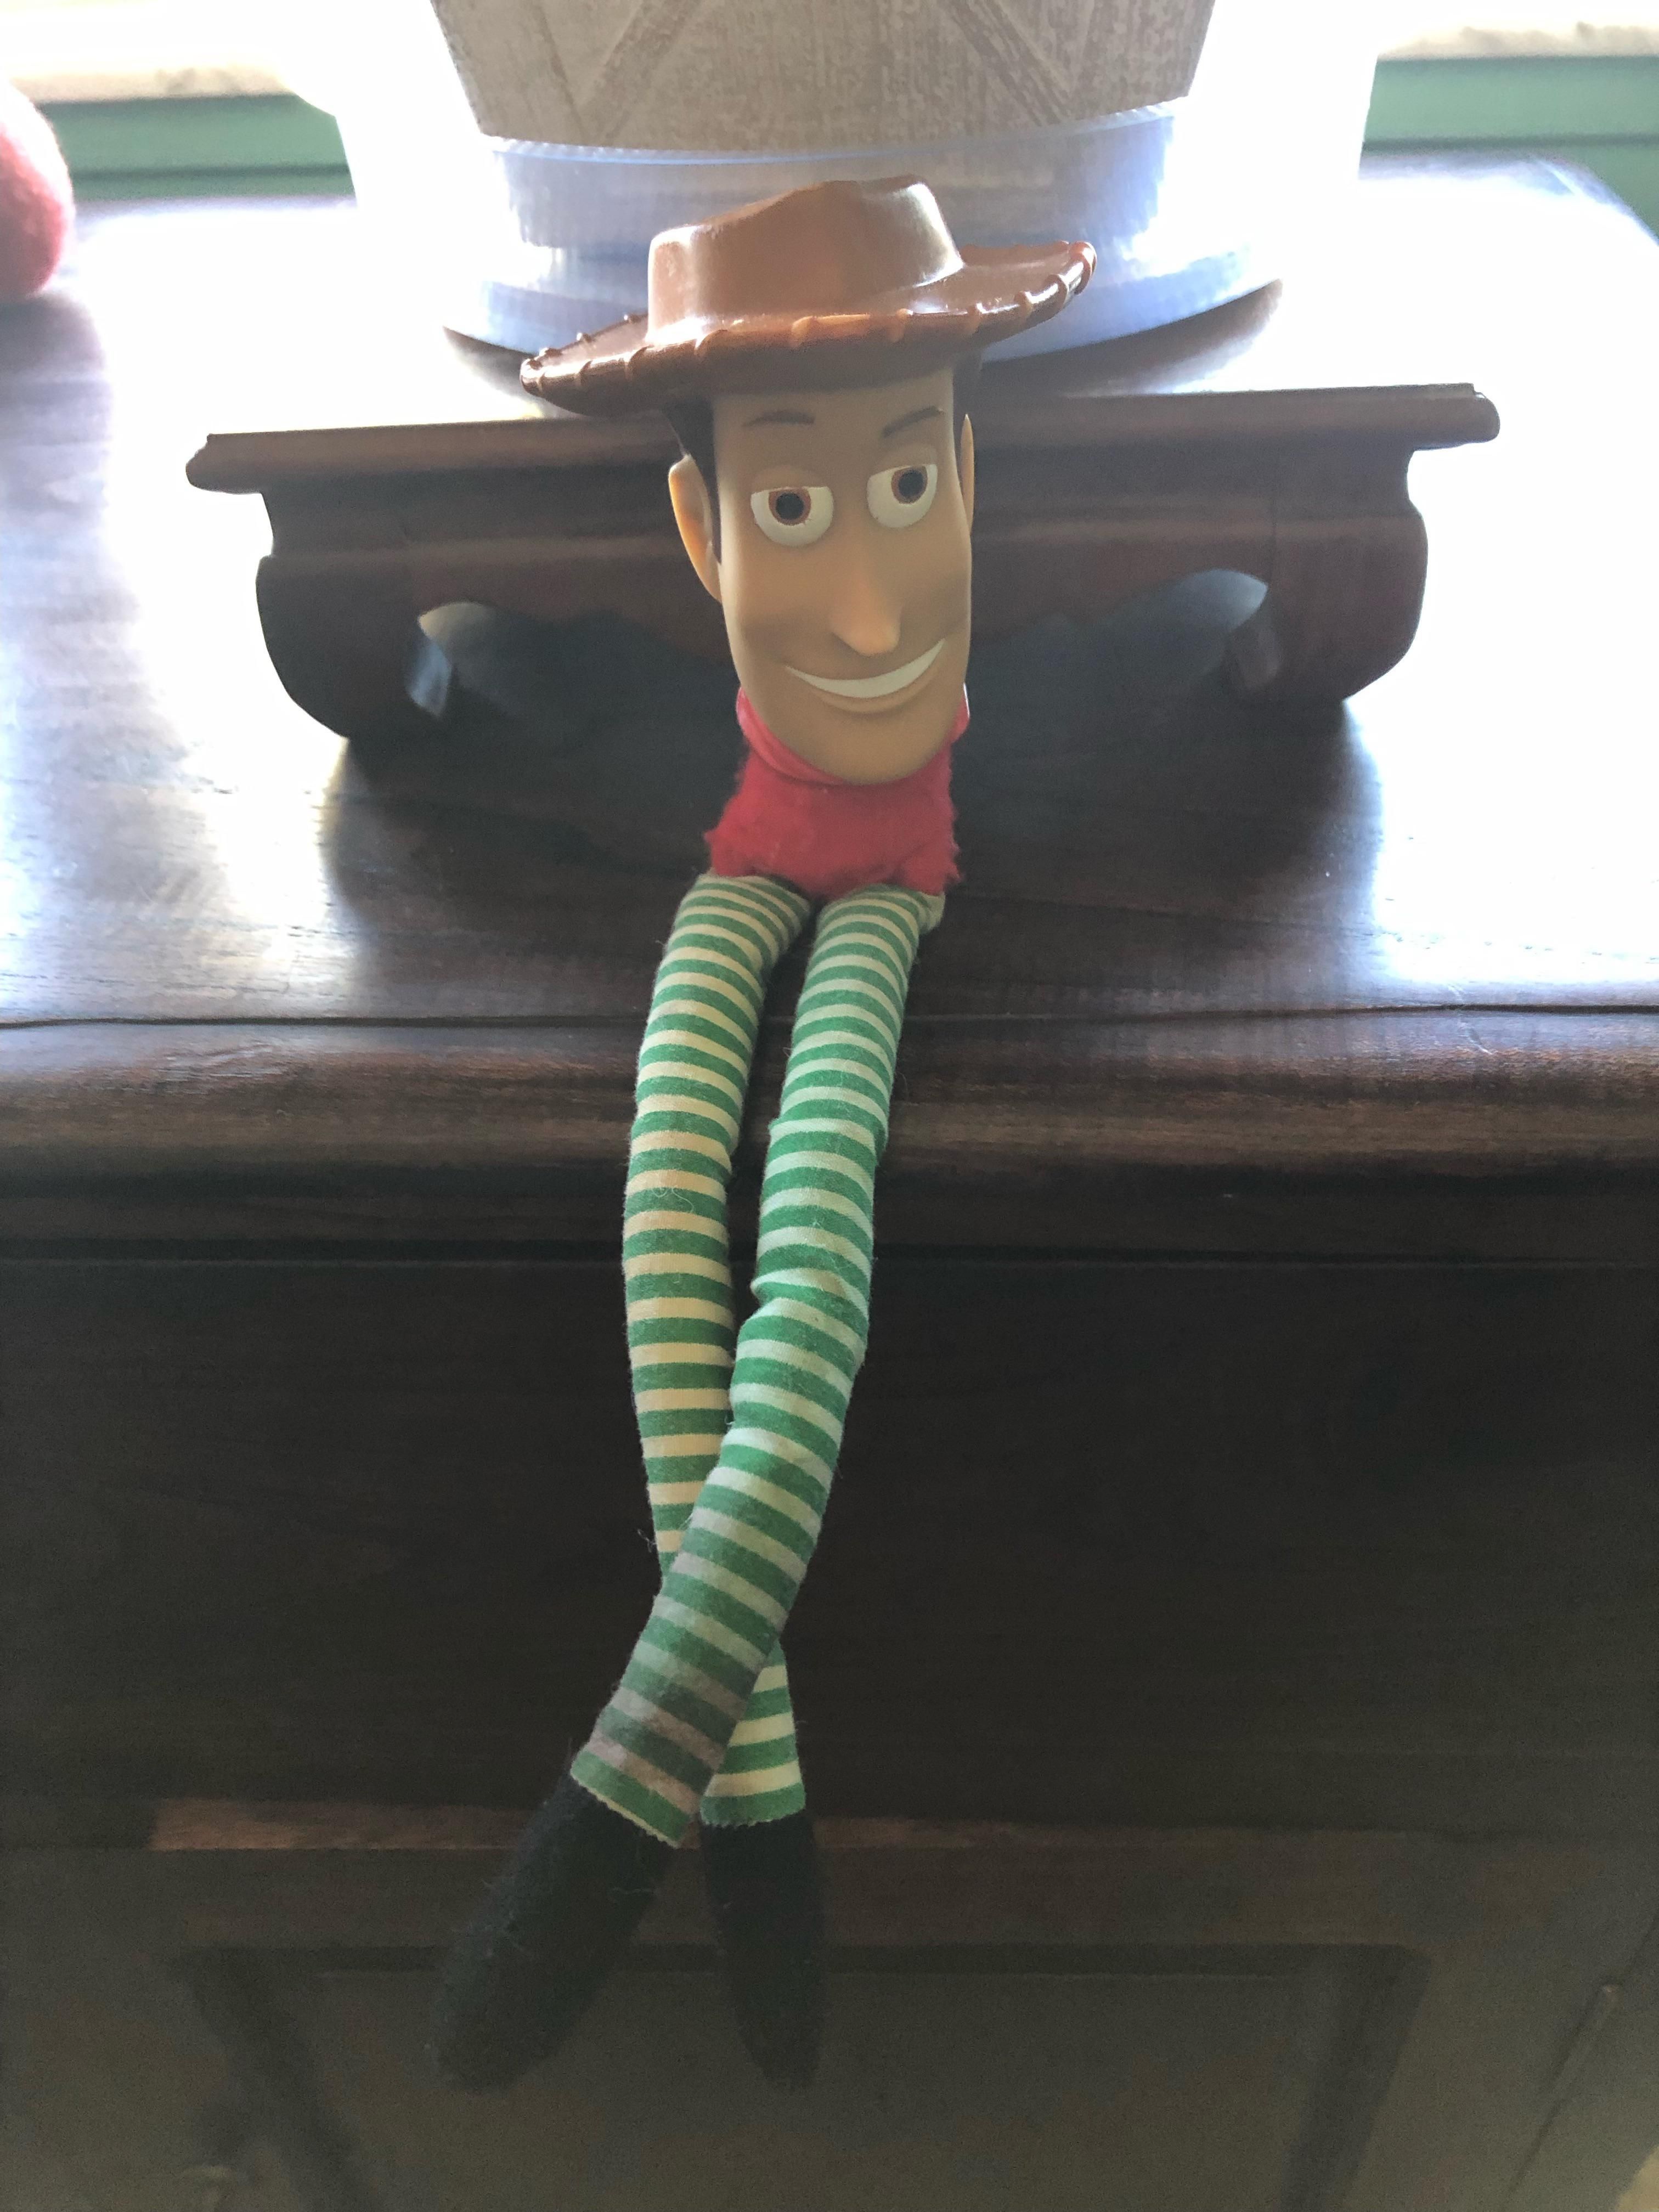 My dad never wanted to spend the money on a new toy after my Woody doll broke as a young child. I present this cursed creation that I spent an unholy amount of time with.